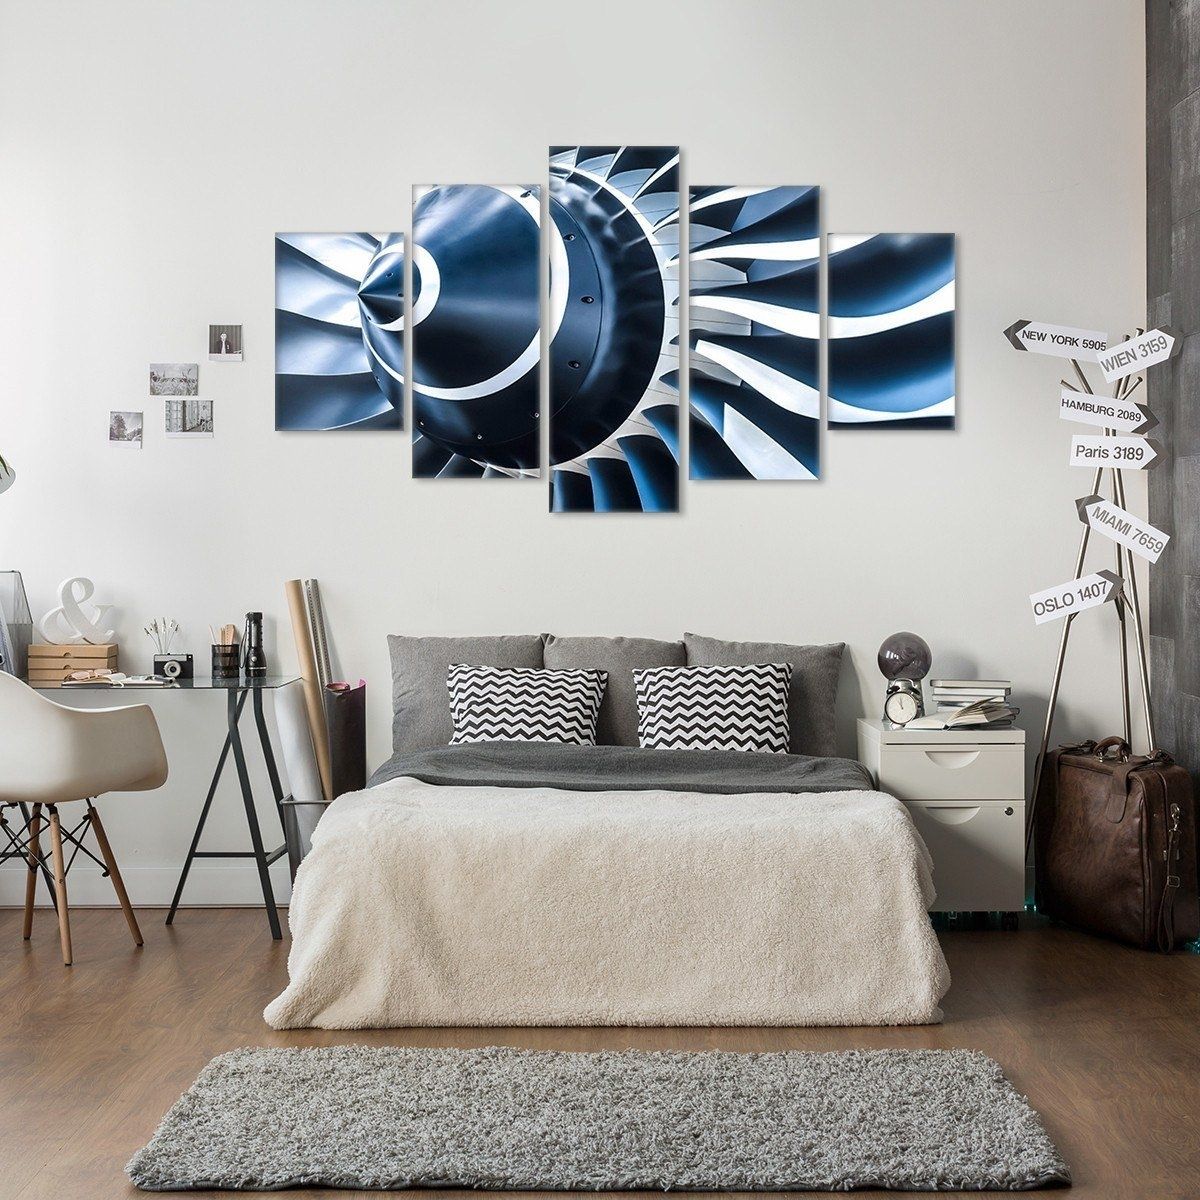 Aviation Wall Art Bedroom : Andrews Living Arts – Cool Themed With Aviation Wall Art (Photo 1 of 20)